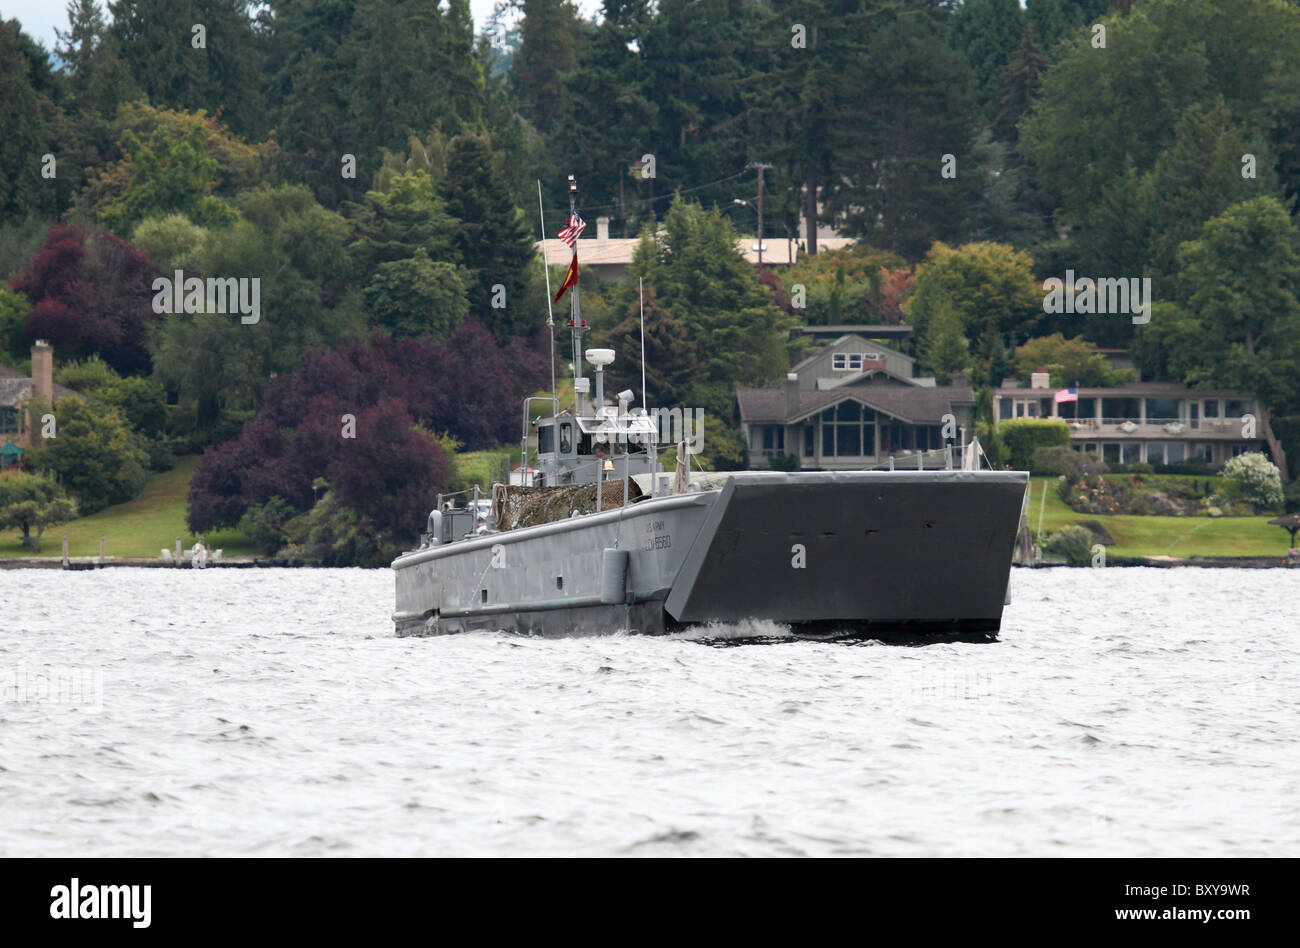 US Army Landing Craft patrolling Lake Washington during Seafair 2010 to help spectators stay away from  Blue Angels performance Stock Photo